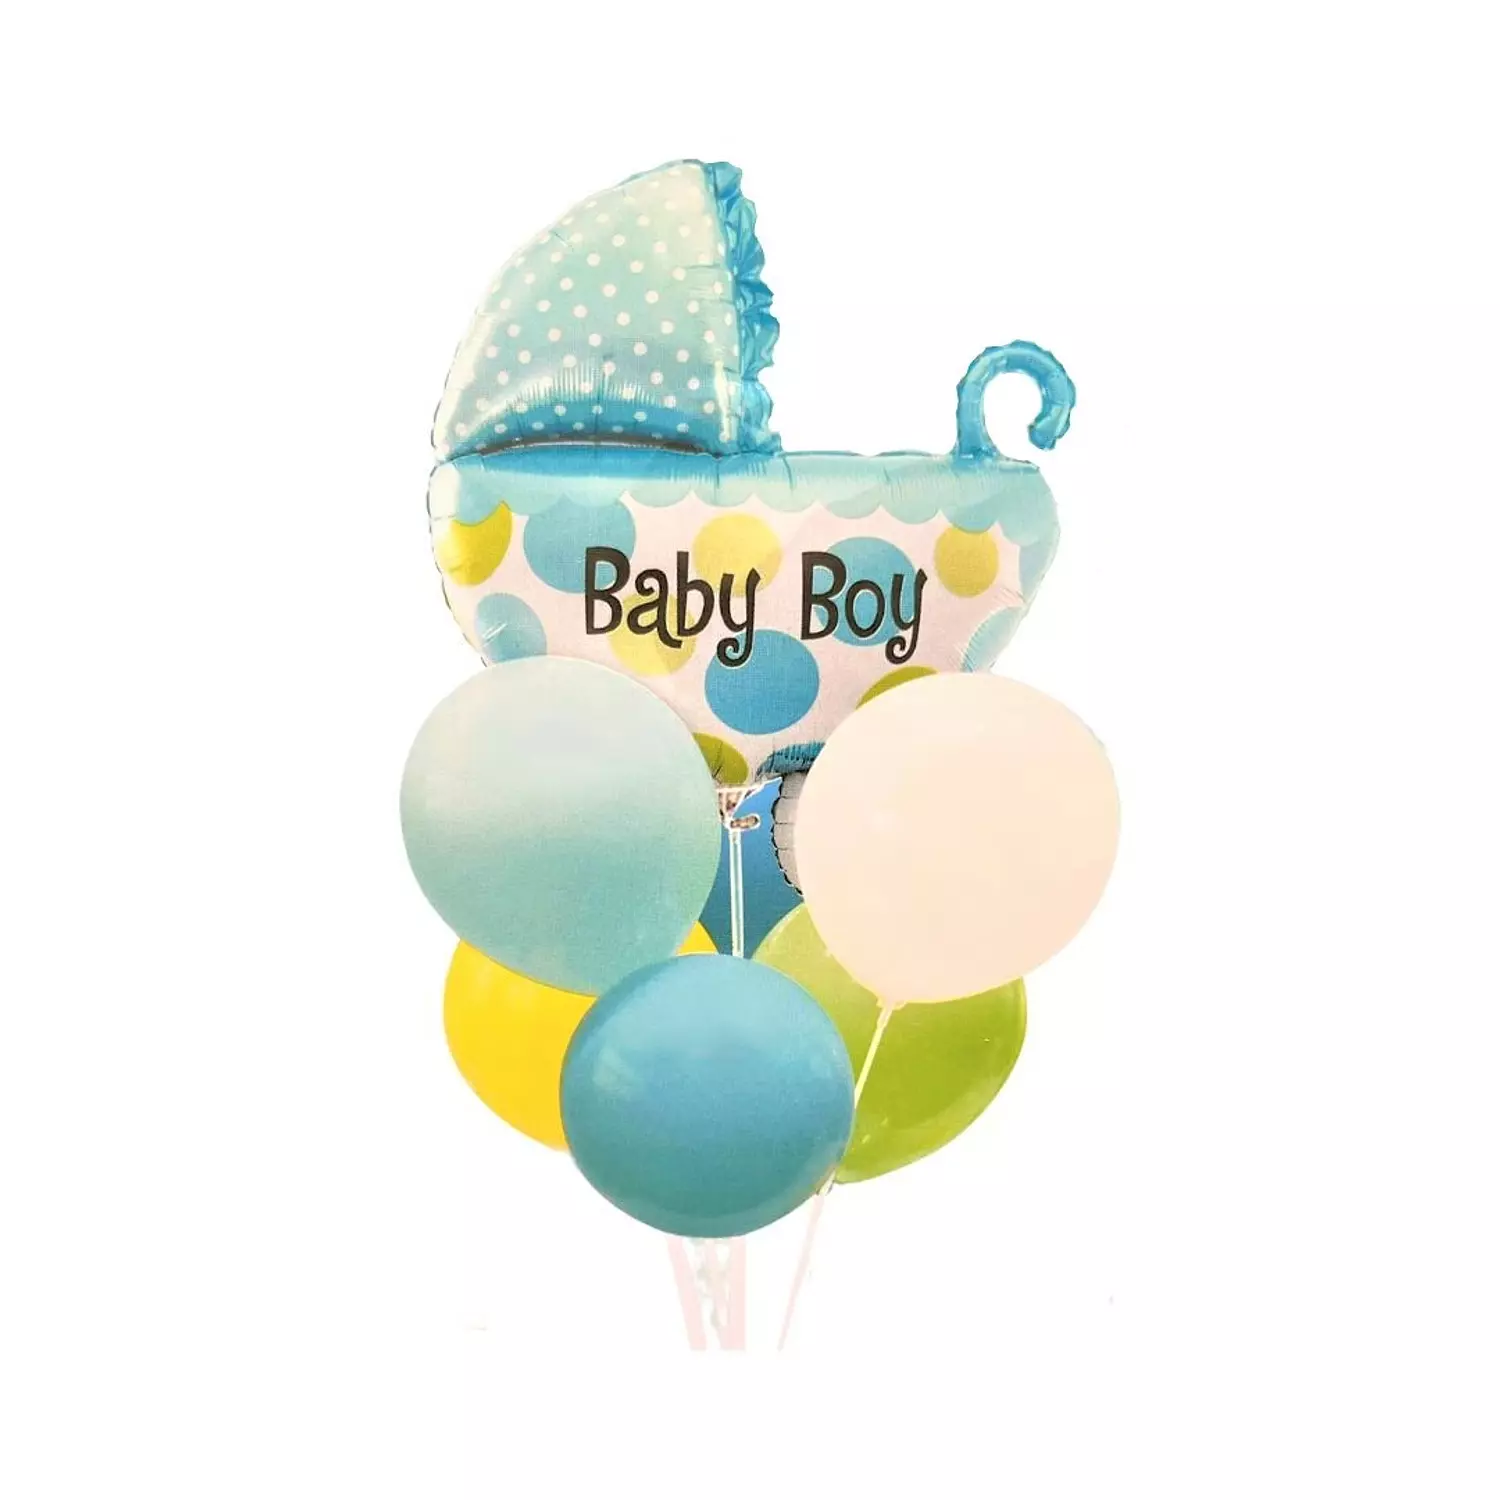 Baby Boy Balloon and Latex Collection hover image